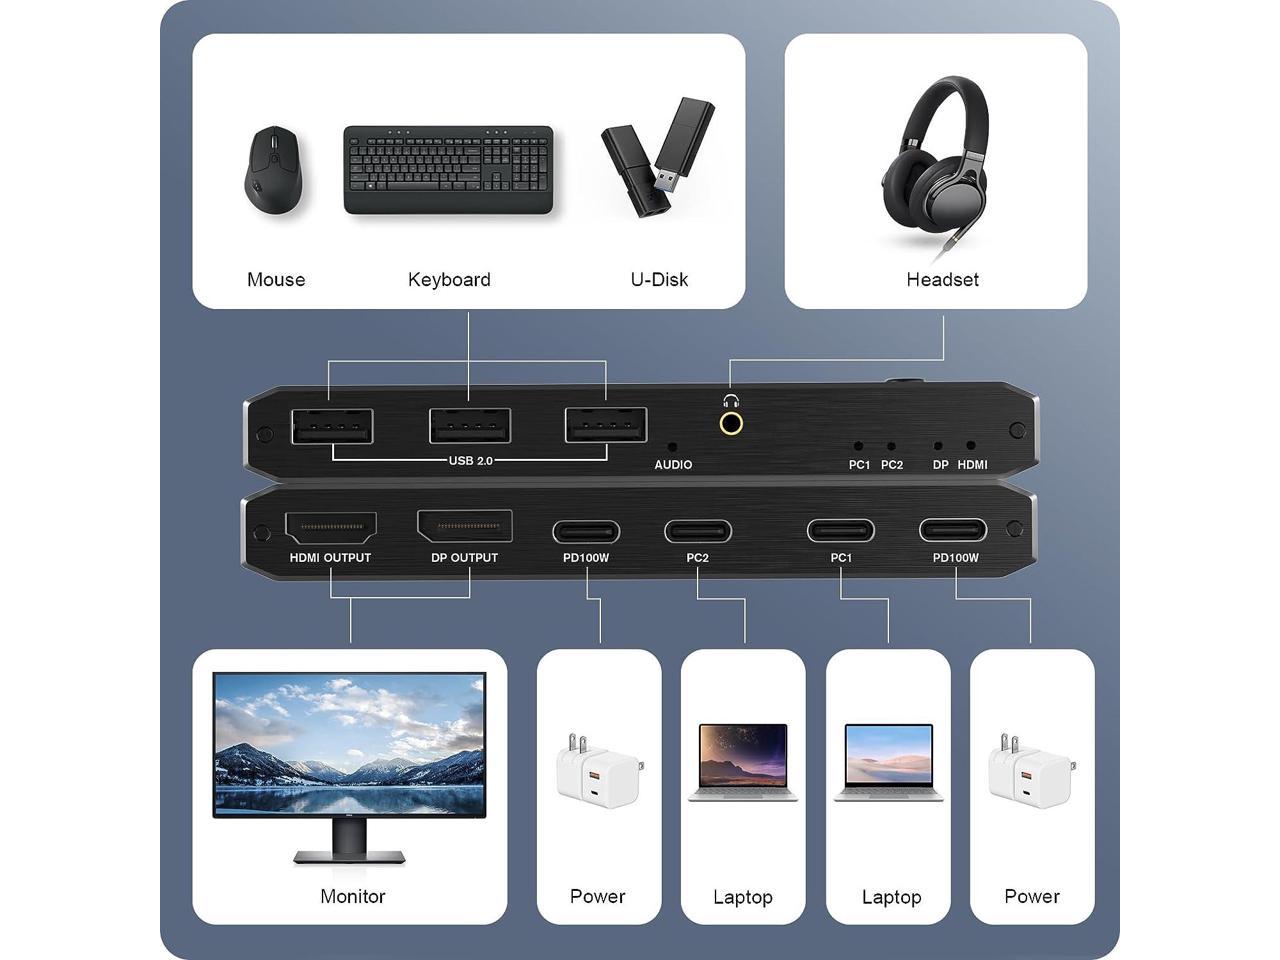 HF-HKUC2: 8K USB C KVM Switch HDMI 2 Port 8K@60Hz 4K@120Hz, HDMI 2.1 KVM Switch with and 100W Power Delivery for 2 Computers Share 1 Monitor(DP/HDMI Output) and 3 USB Devices,3.5mm Audio